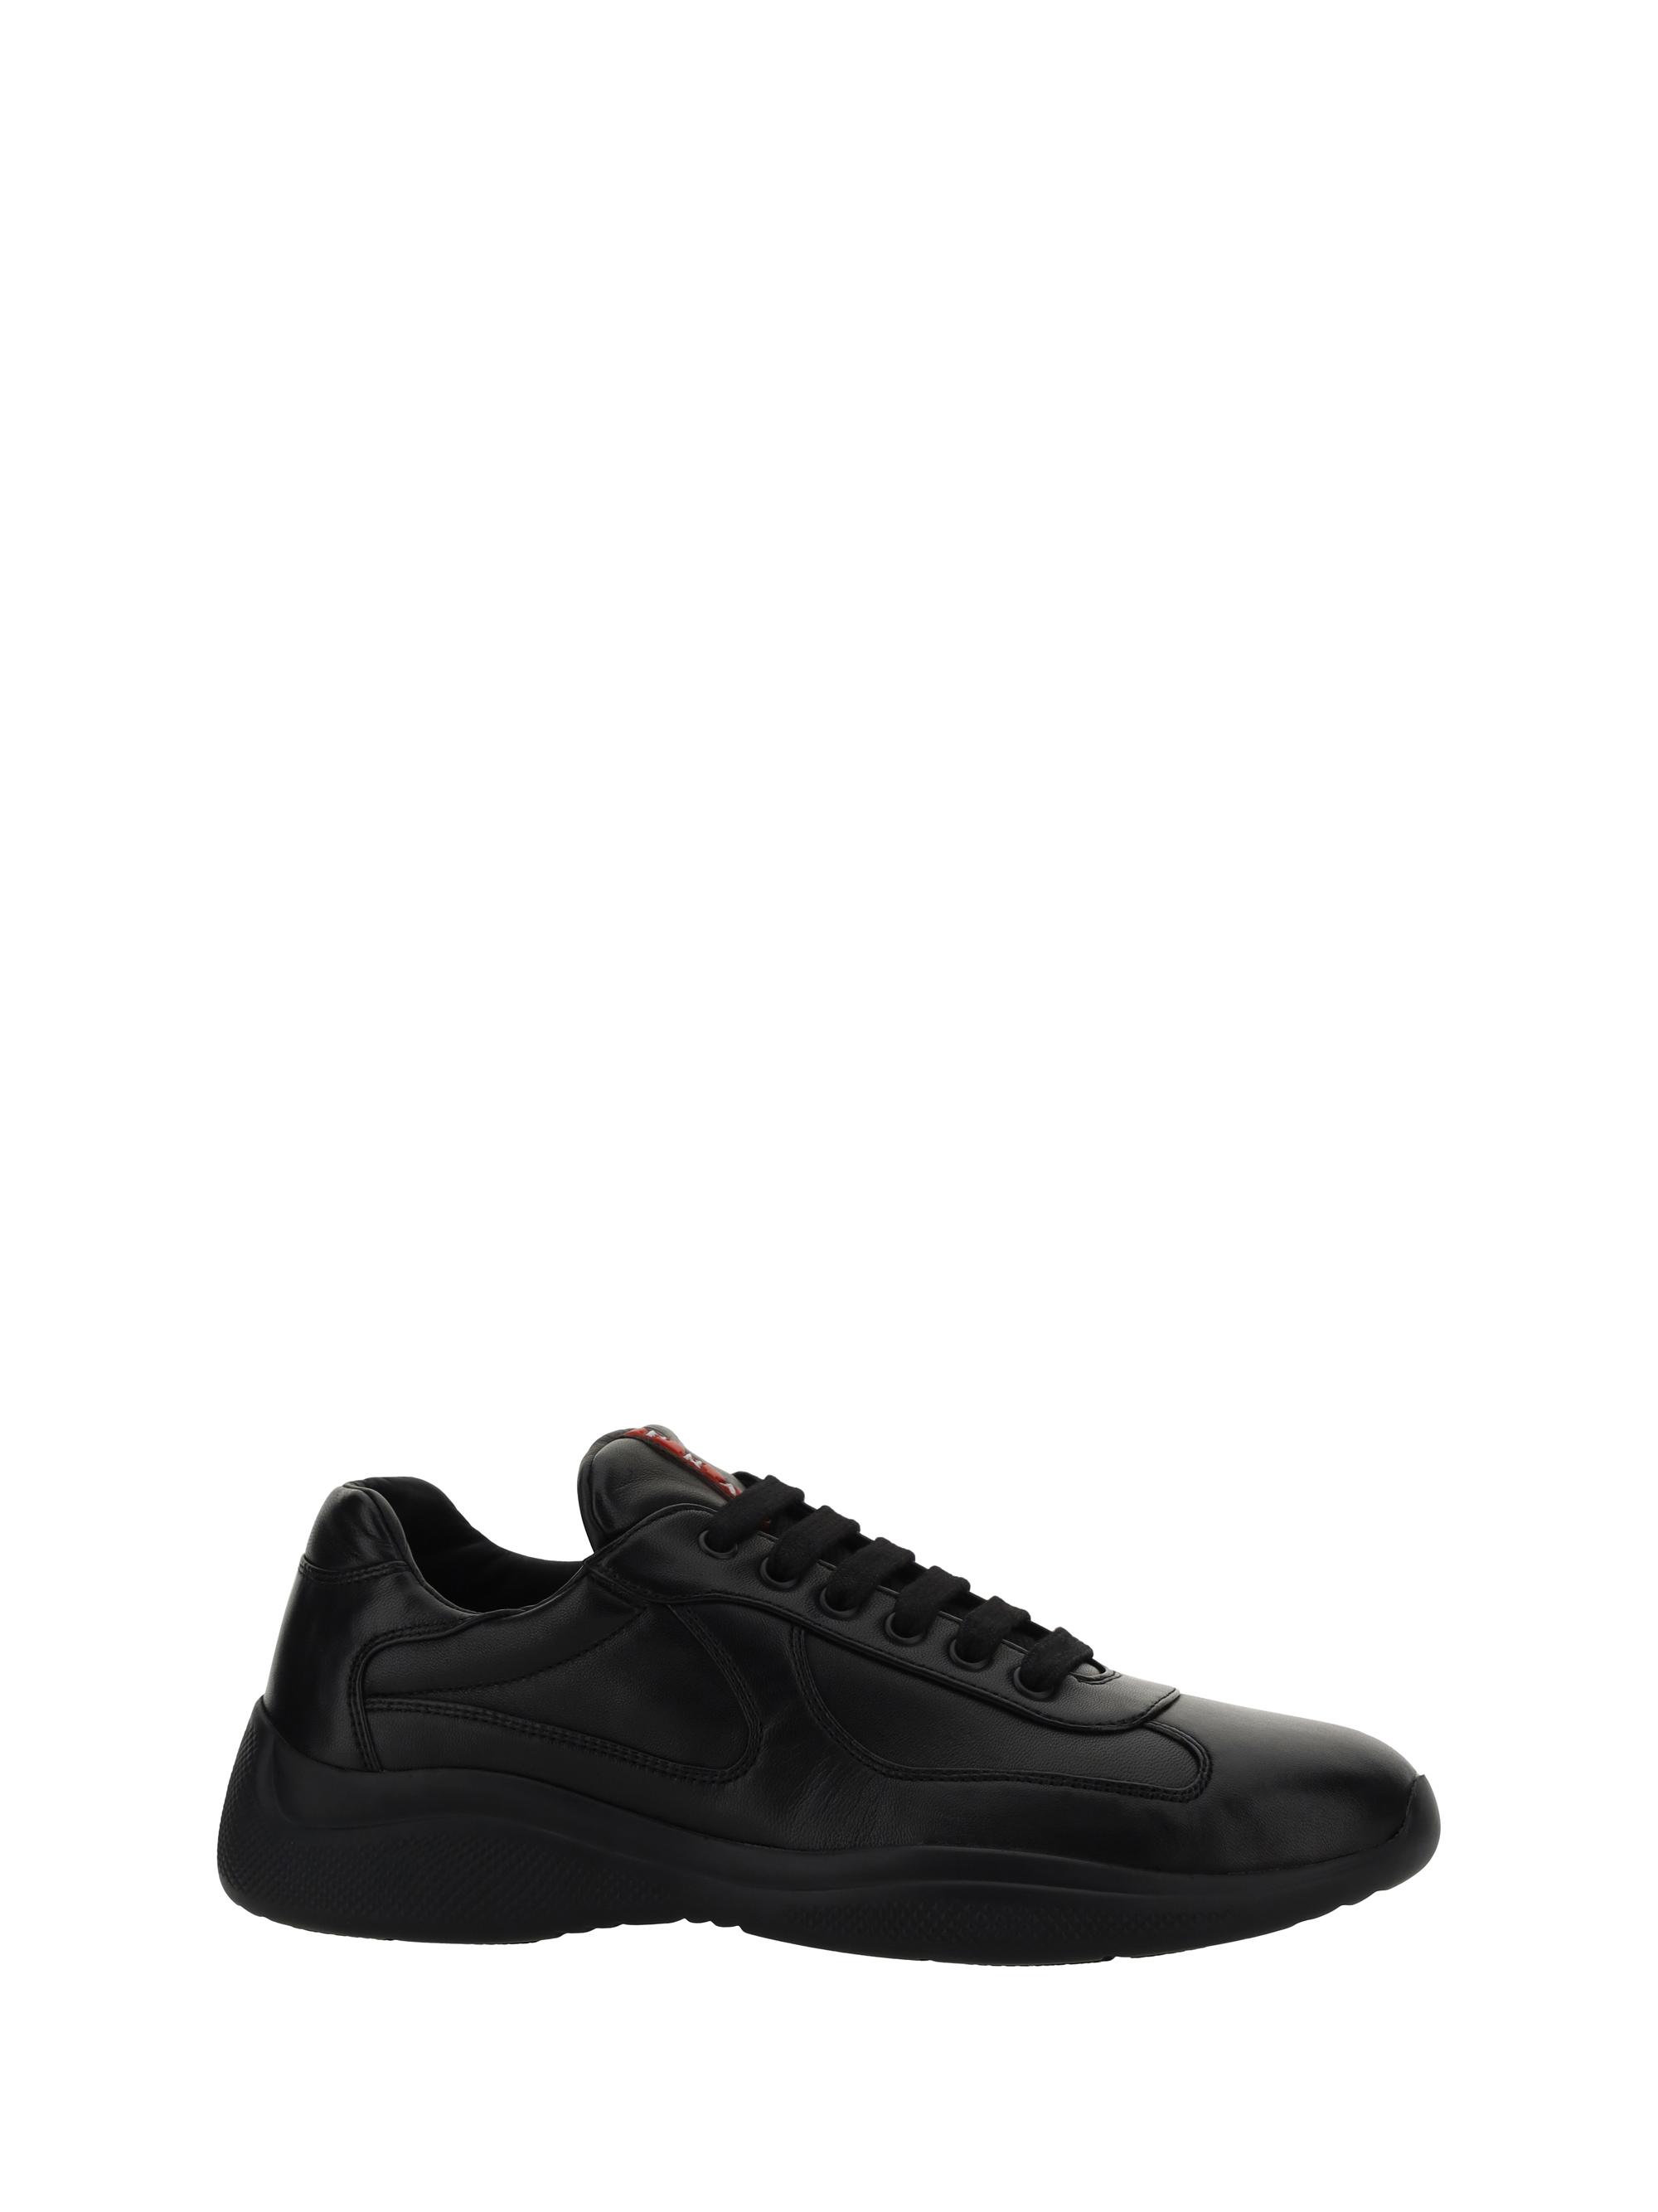 Men's luxury sneakers - Prada sneakers in brushed leather and re-nylon